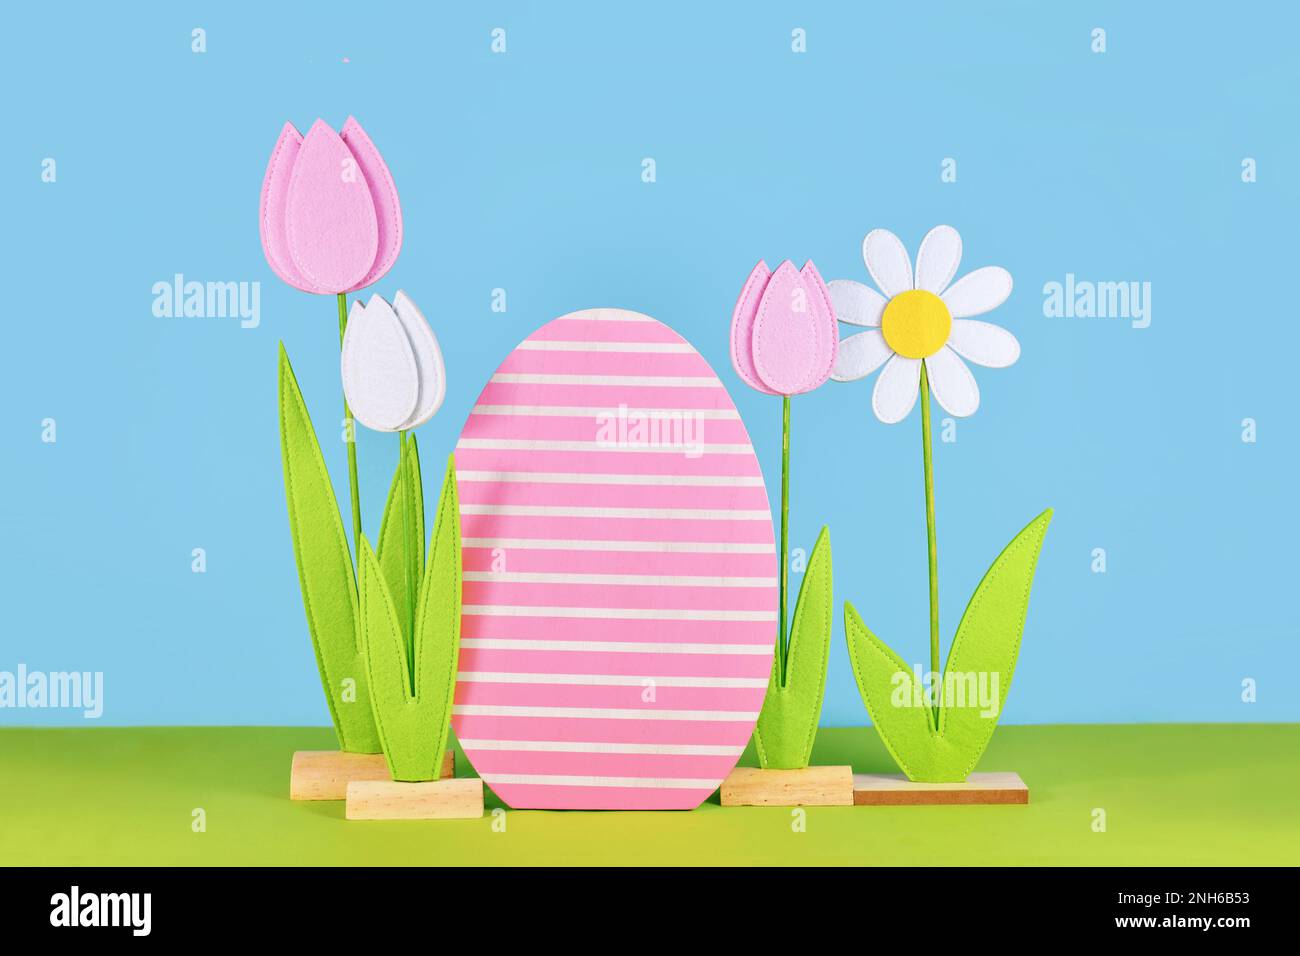 Easter arrangement with felt spring flowers and wooden easter egg in front of blue background Stock Photo